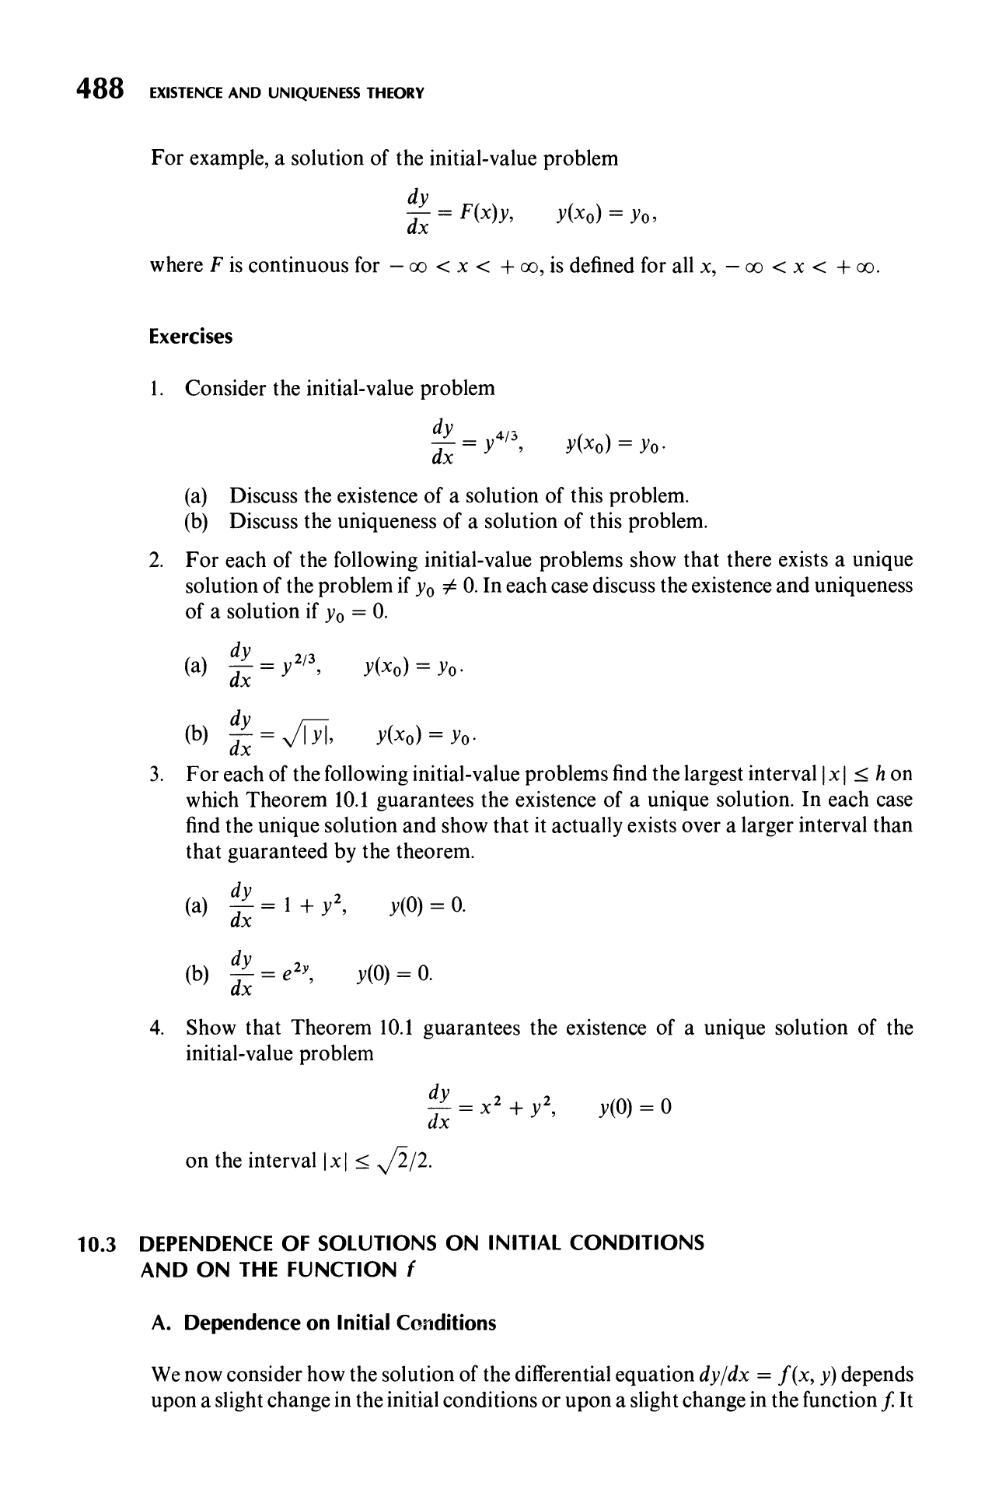 10.3  Dependence of Solutions on Initial Conditions and on the Function